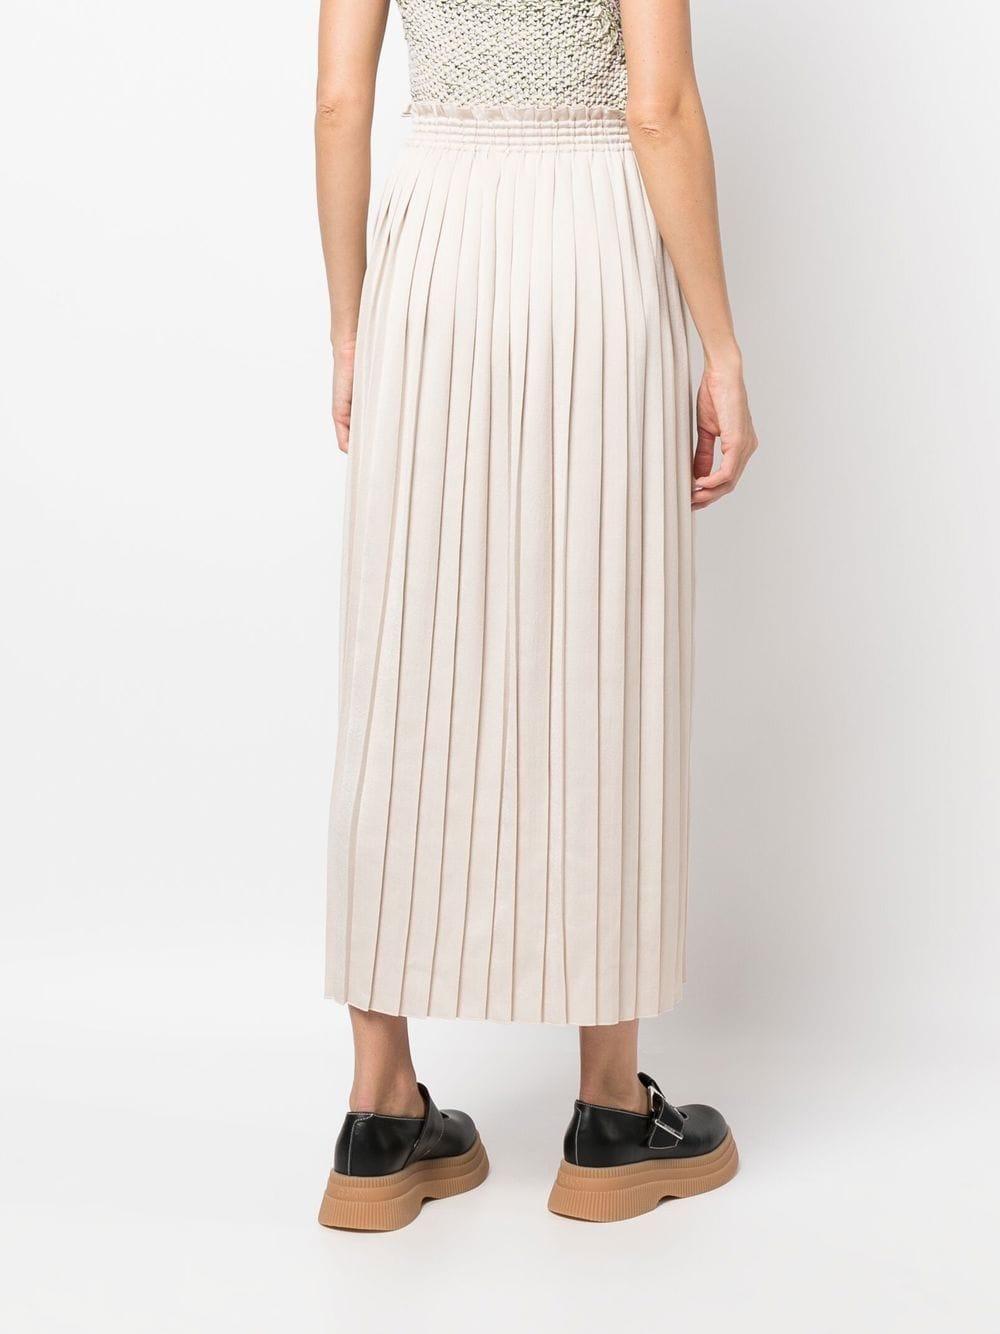 See By Chloé Cotton Fully-pleated Midi Skirt in Natural | Lyst